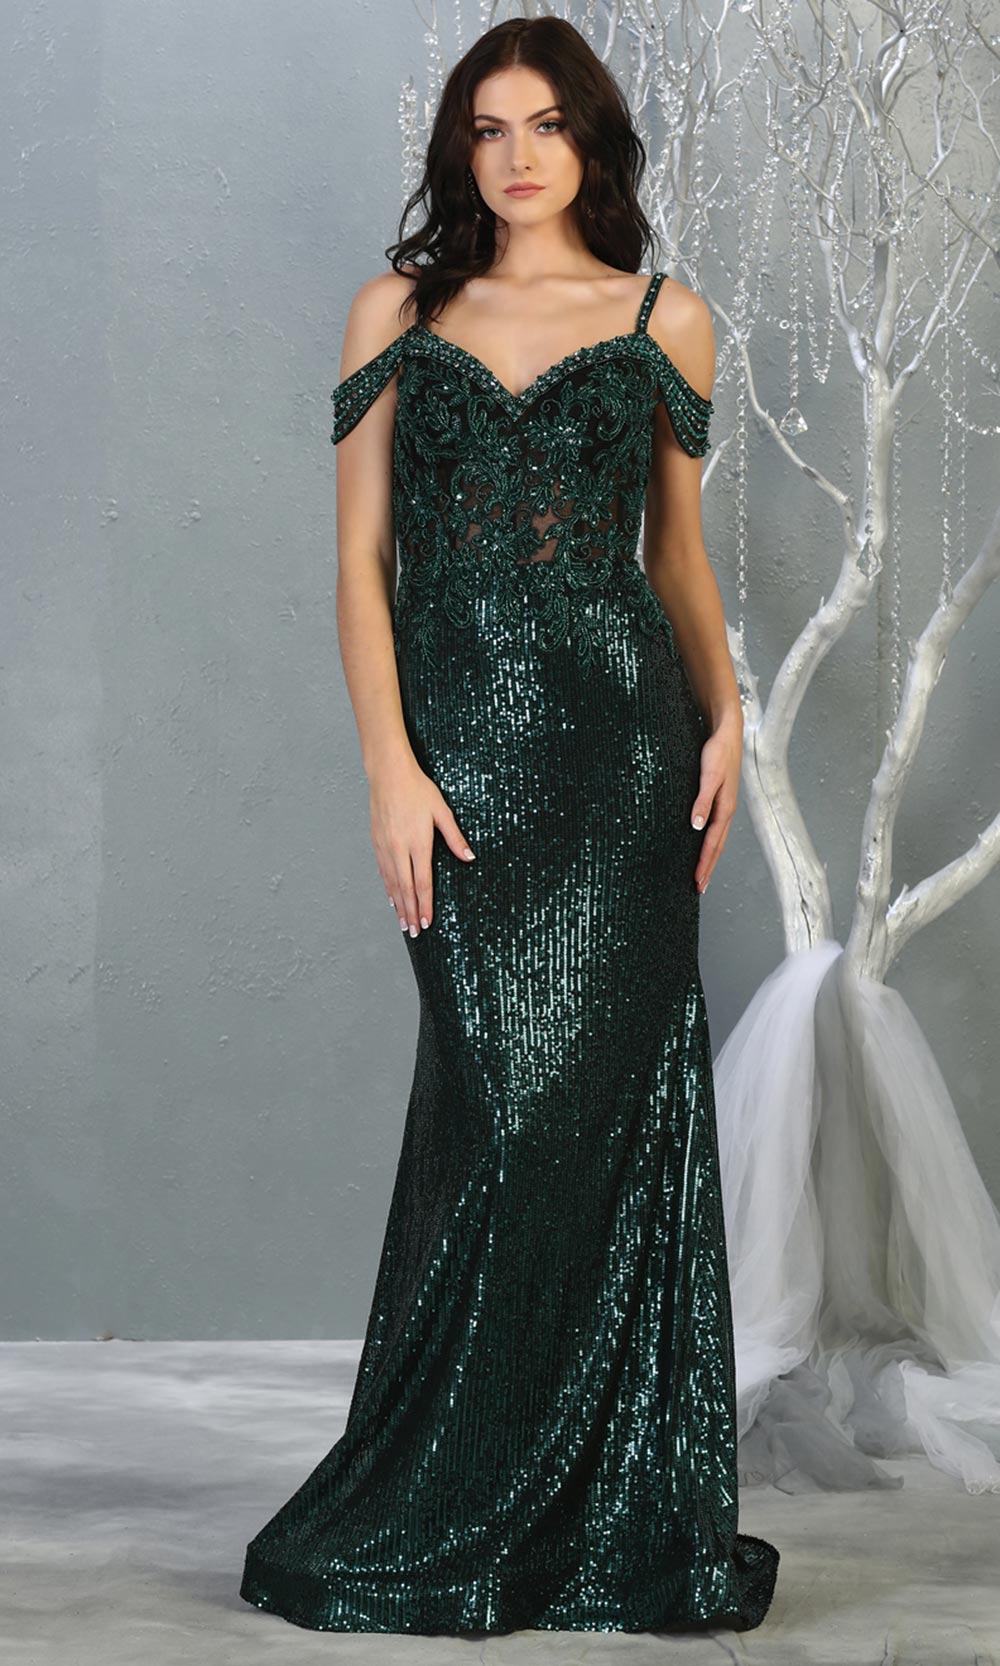 Mayqueen RQ7877 long hunter green sequin off shoulder evening mermaid dress. Full length sleek & sexy fitted dress is perfect for  enagagement/e-shoot dress, formal wedding guest, evening party dress, prom, black tie, gala. Plus sizes avail.jpg